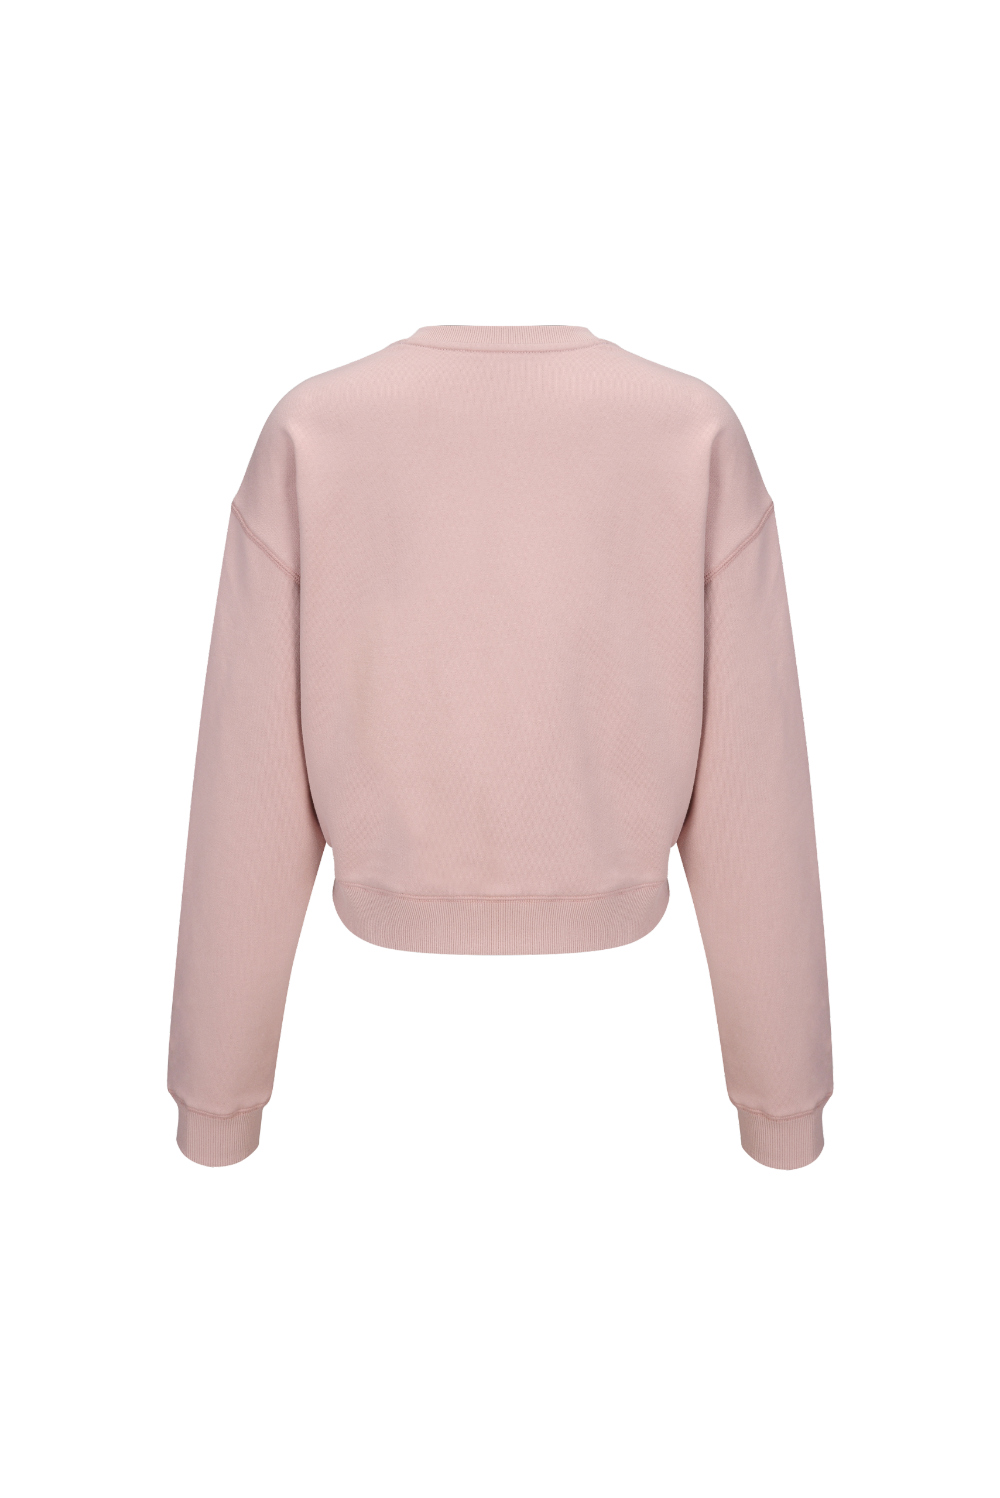 long sleeved tee baby pink color image-S1L75